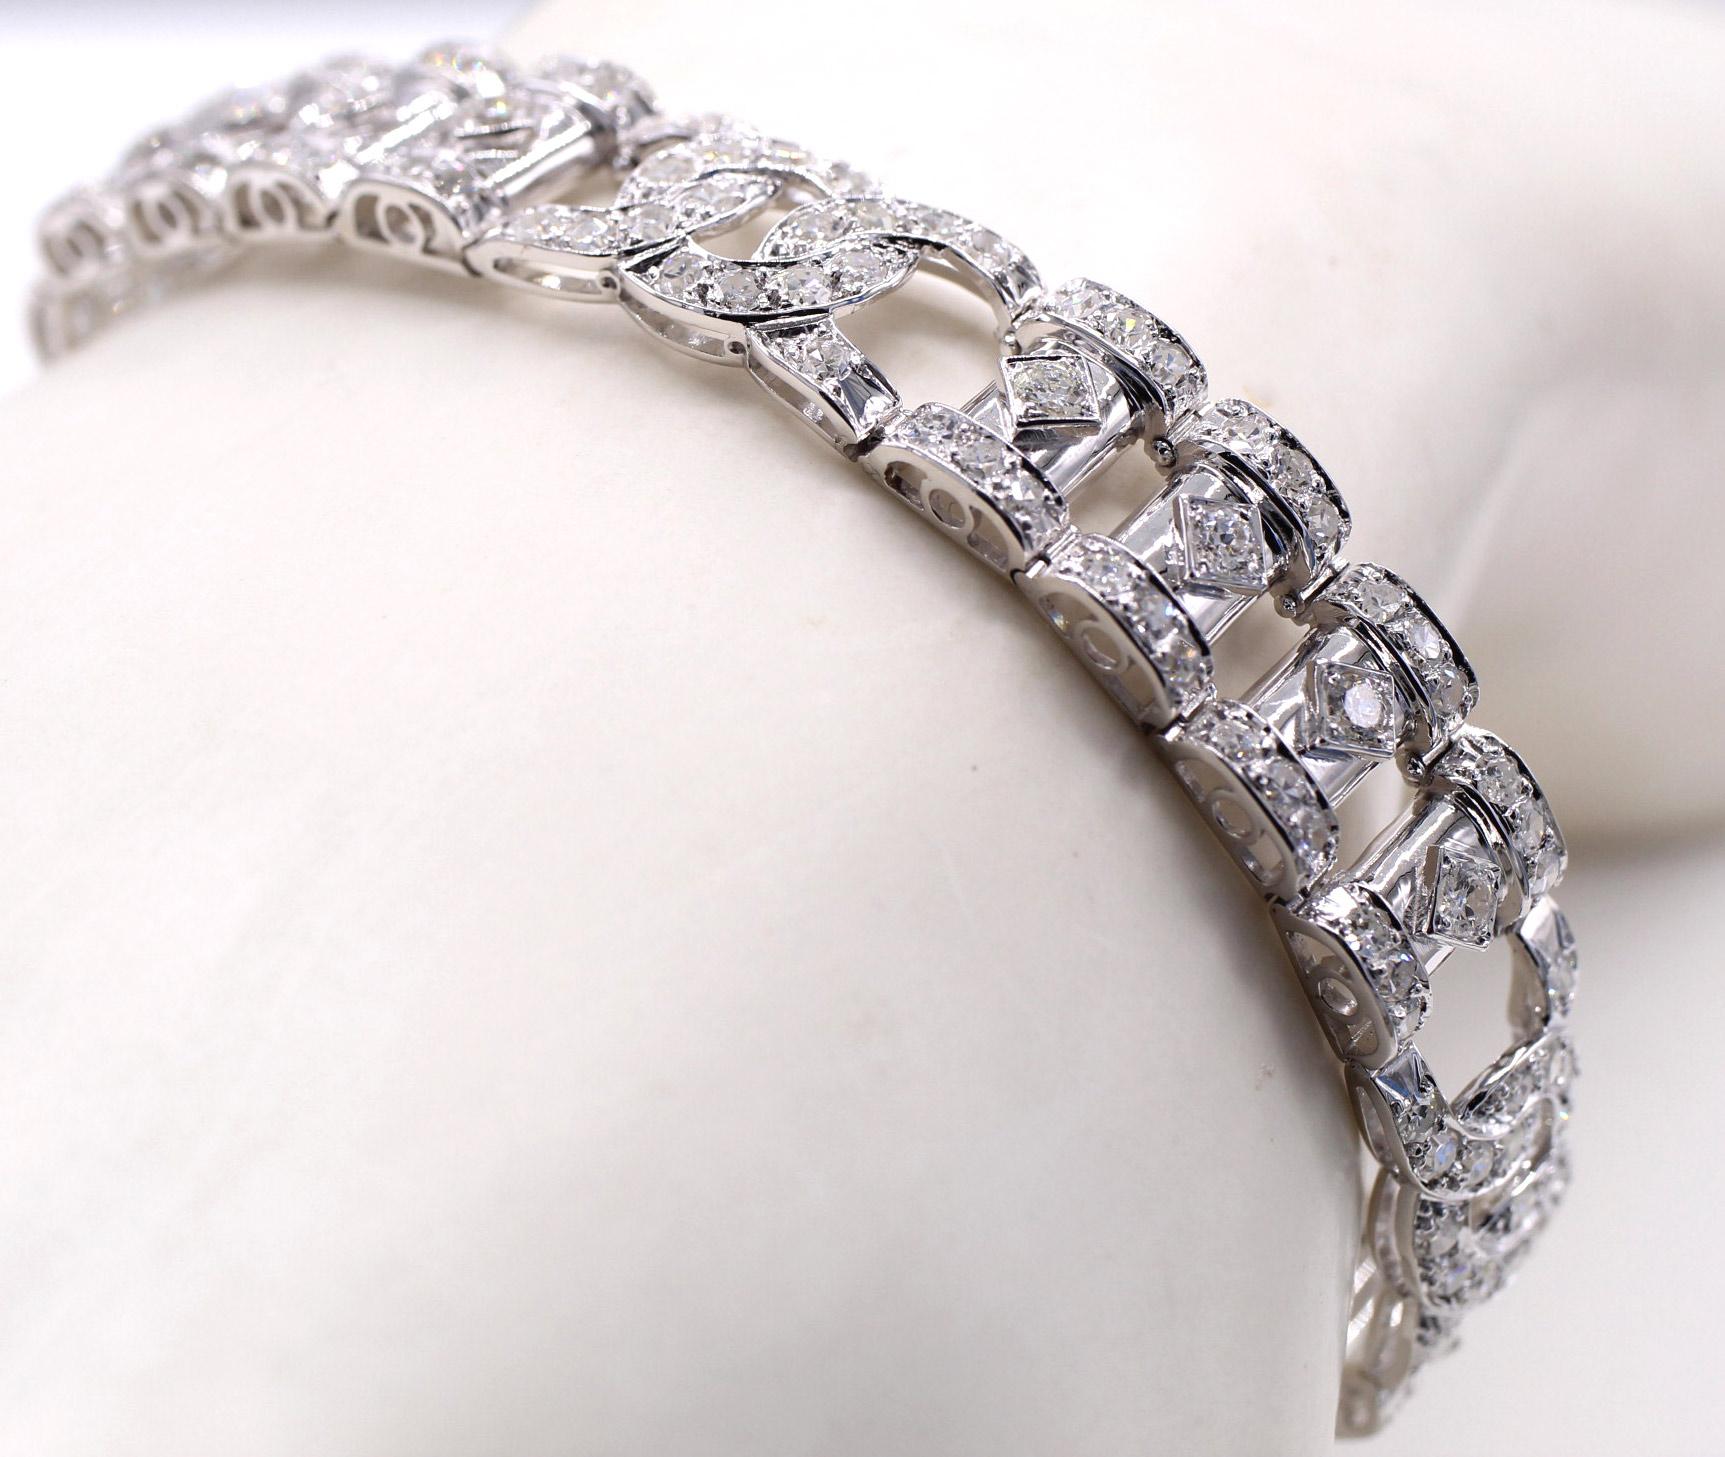 Beautifully designed and handcrafted in 18 karat white gold this flexible link Art Deco French bracelet from ca 1930 is set with lively white bright old cut round diamonds. Length 7 7/8 inches in length. French hallmarks and markers mark.